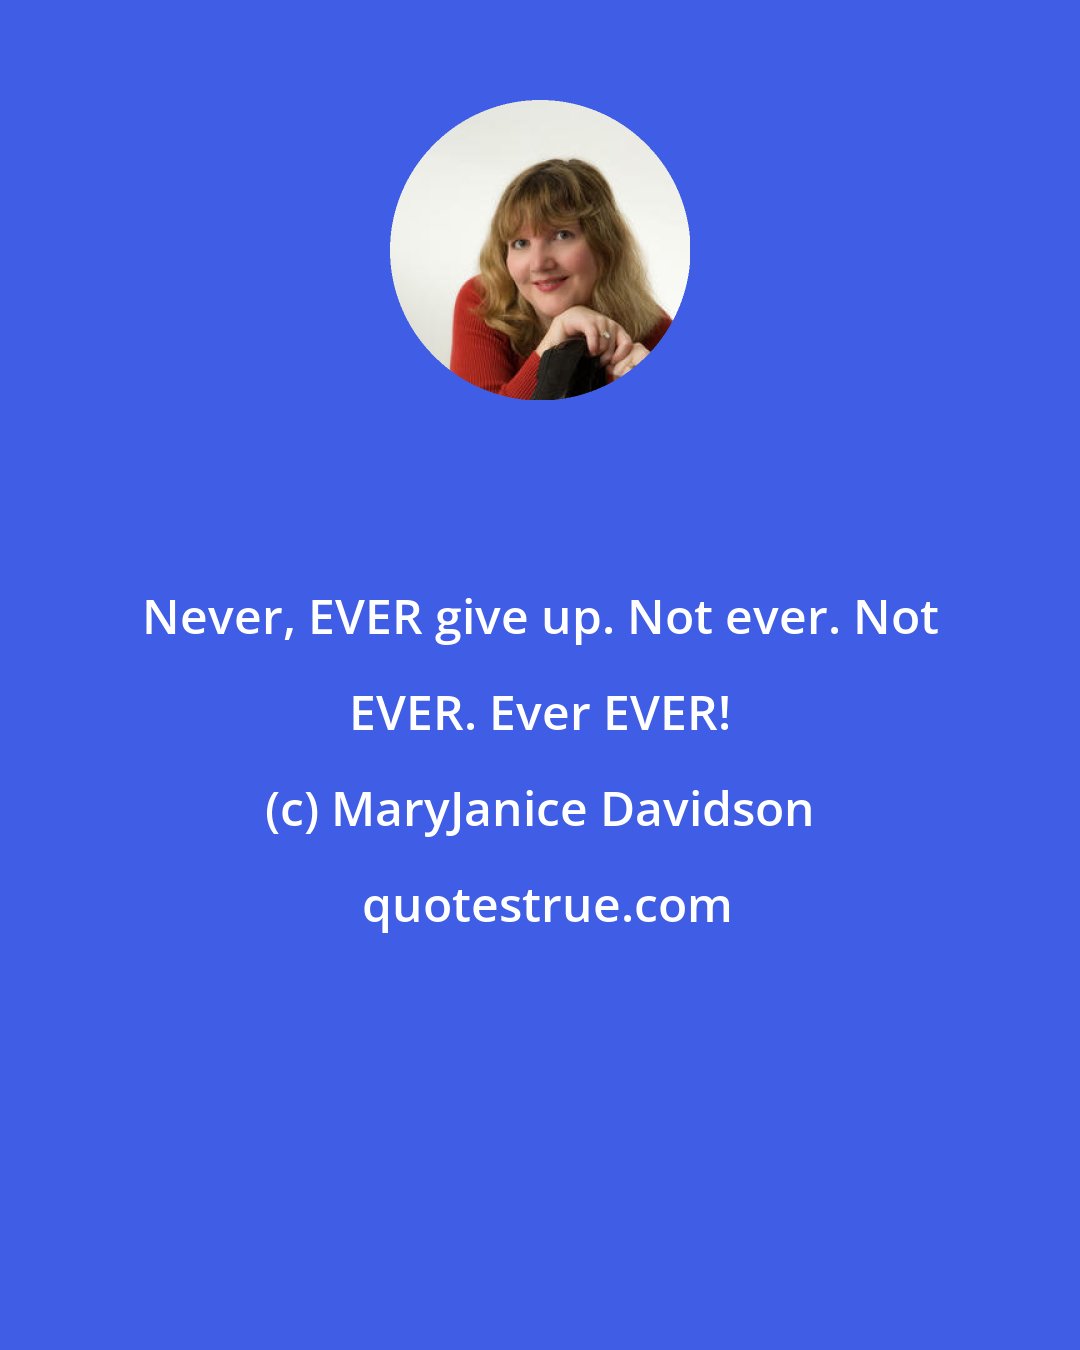 MaryJanice Davidson: Never, EVER give up. Not ever. Not EVER. Ever EVER!